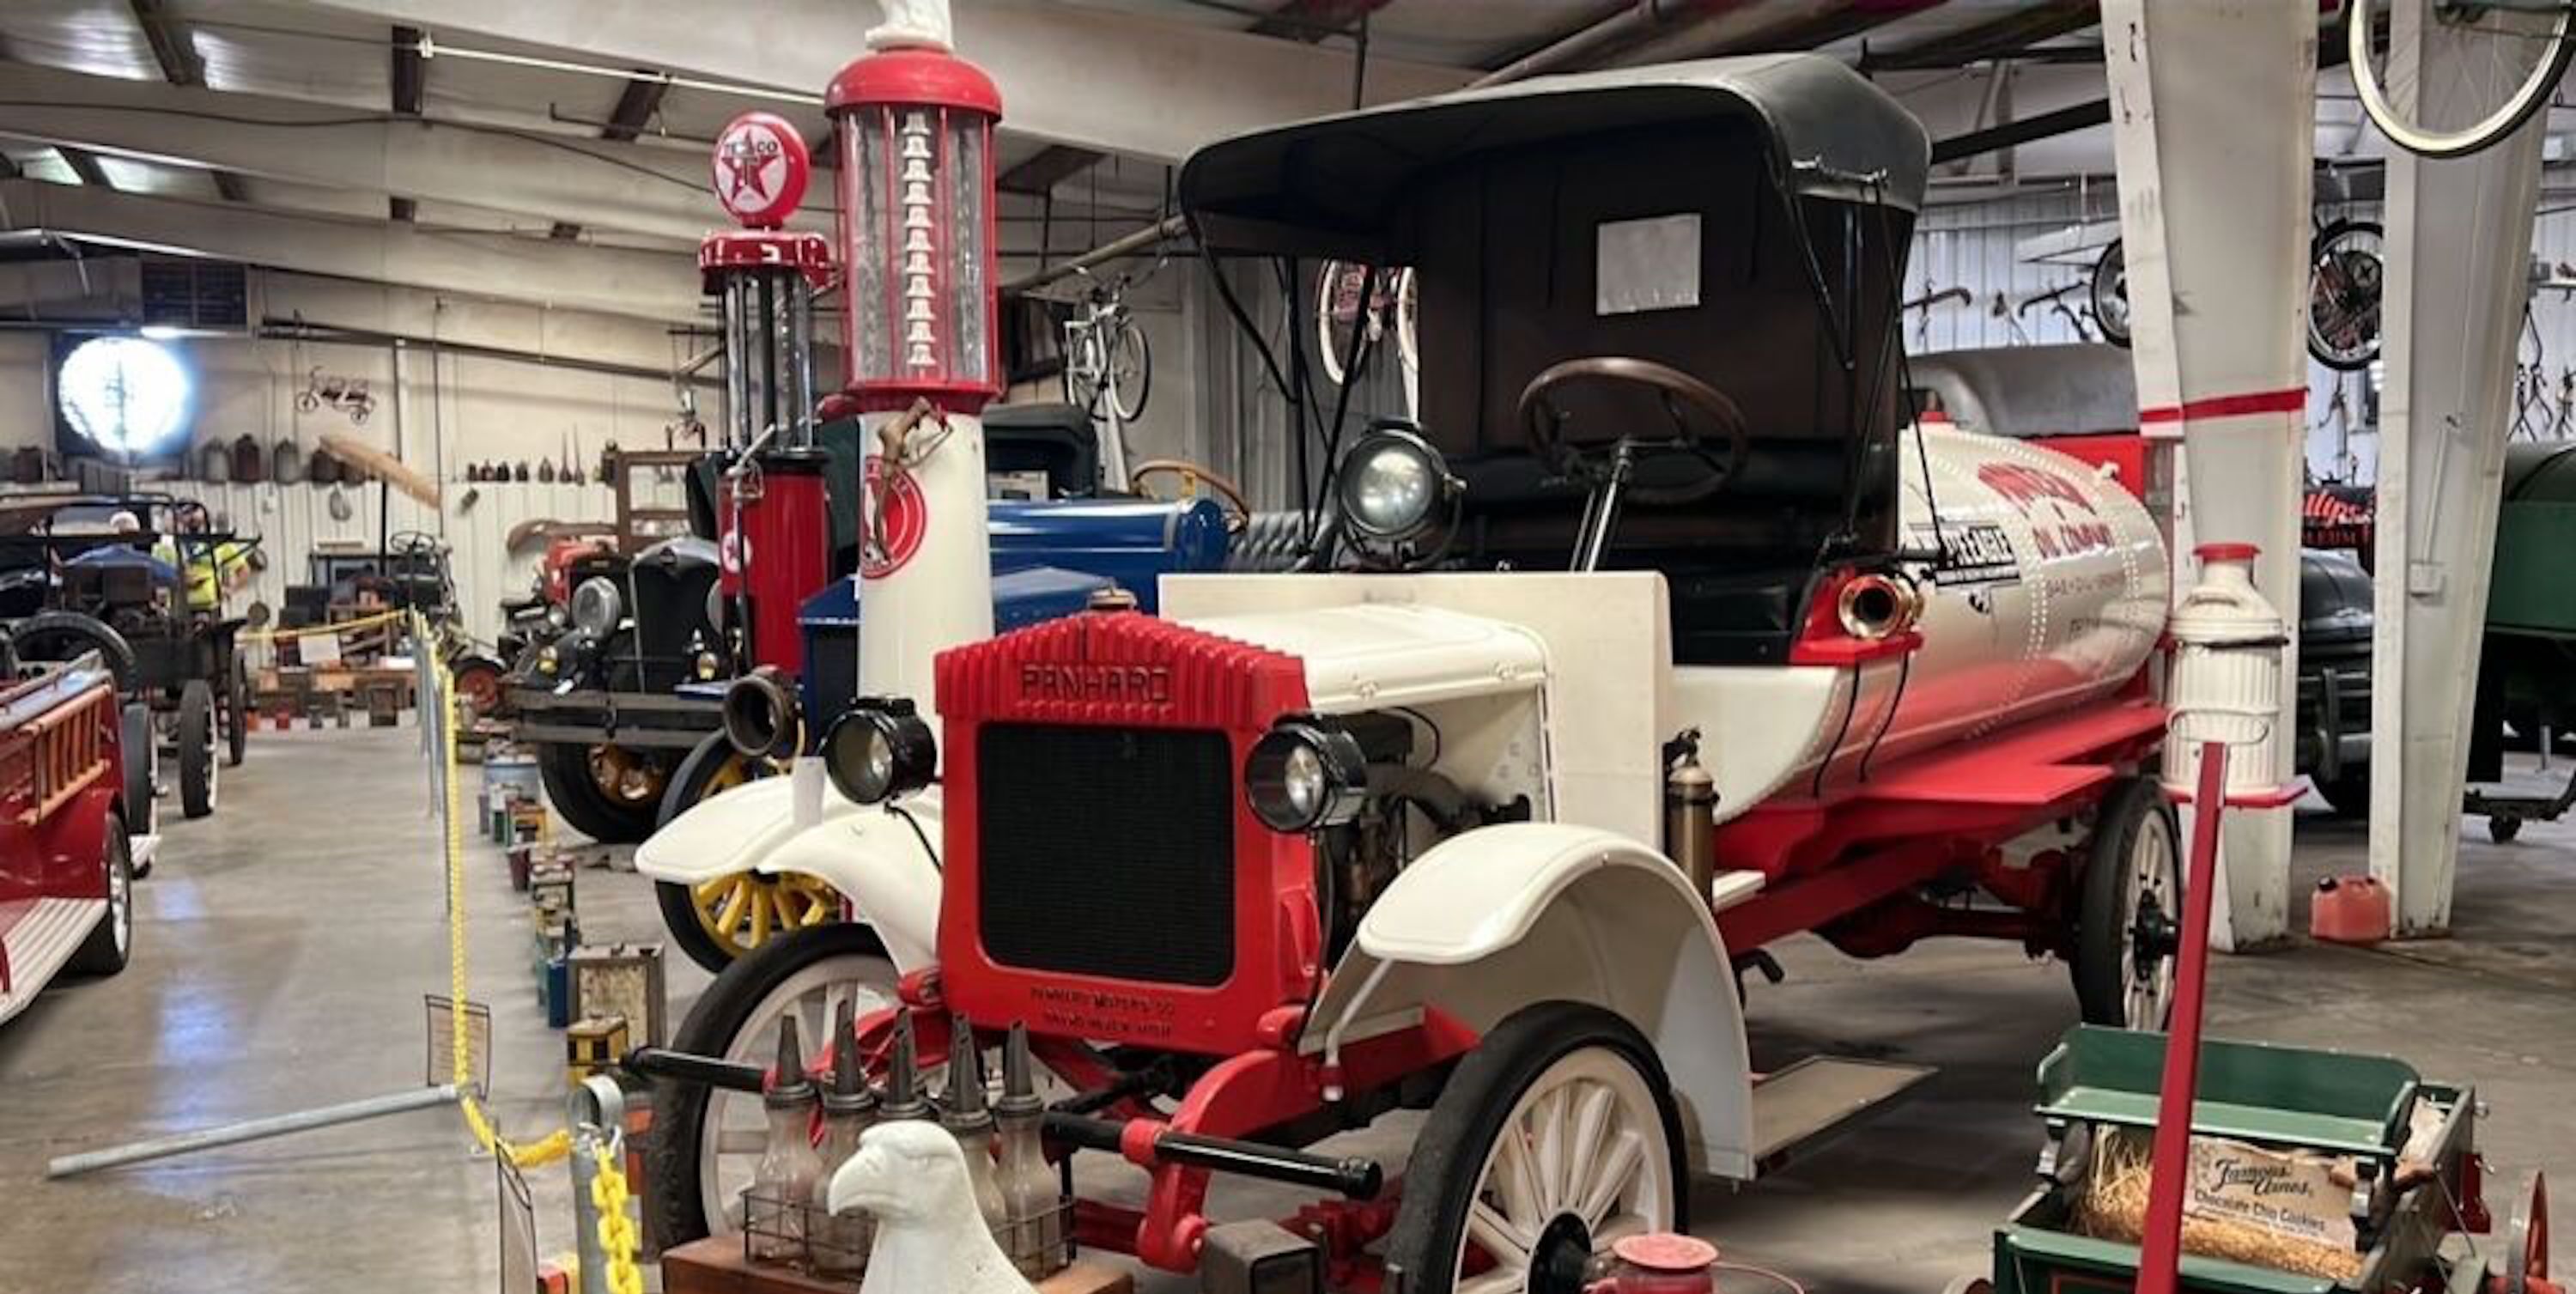 This Car Museum Liquidation Auction Is Packed With Absurd Vehicles